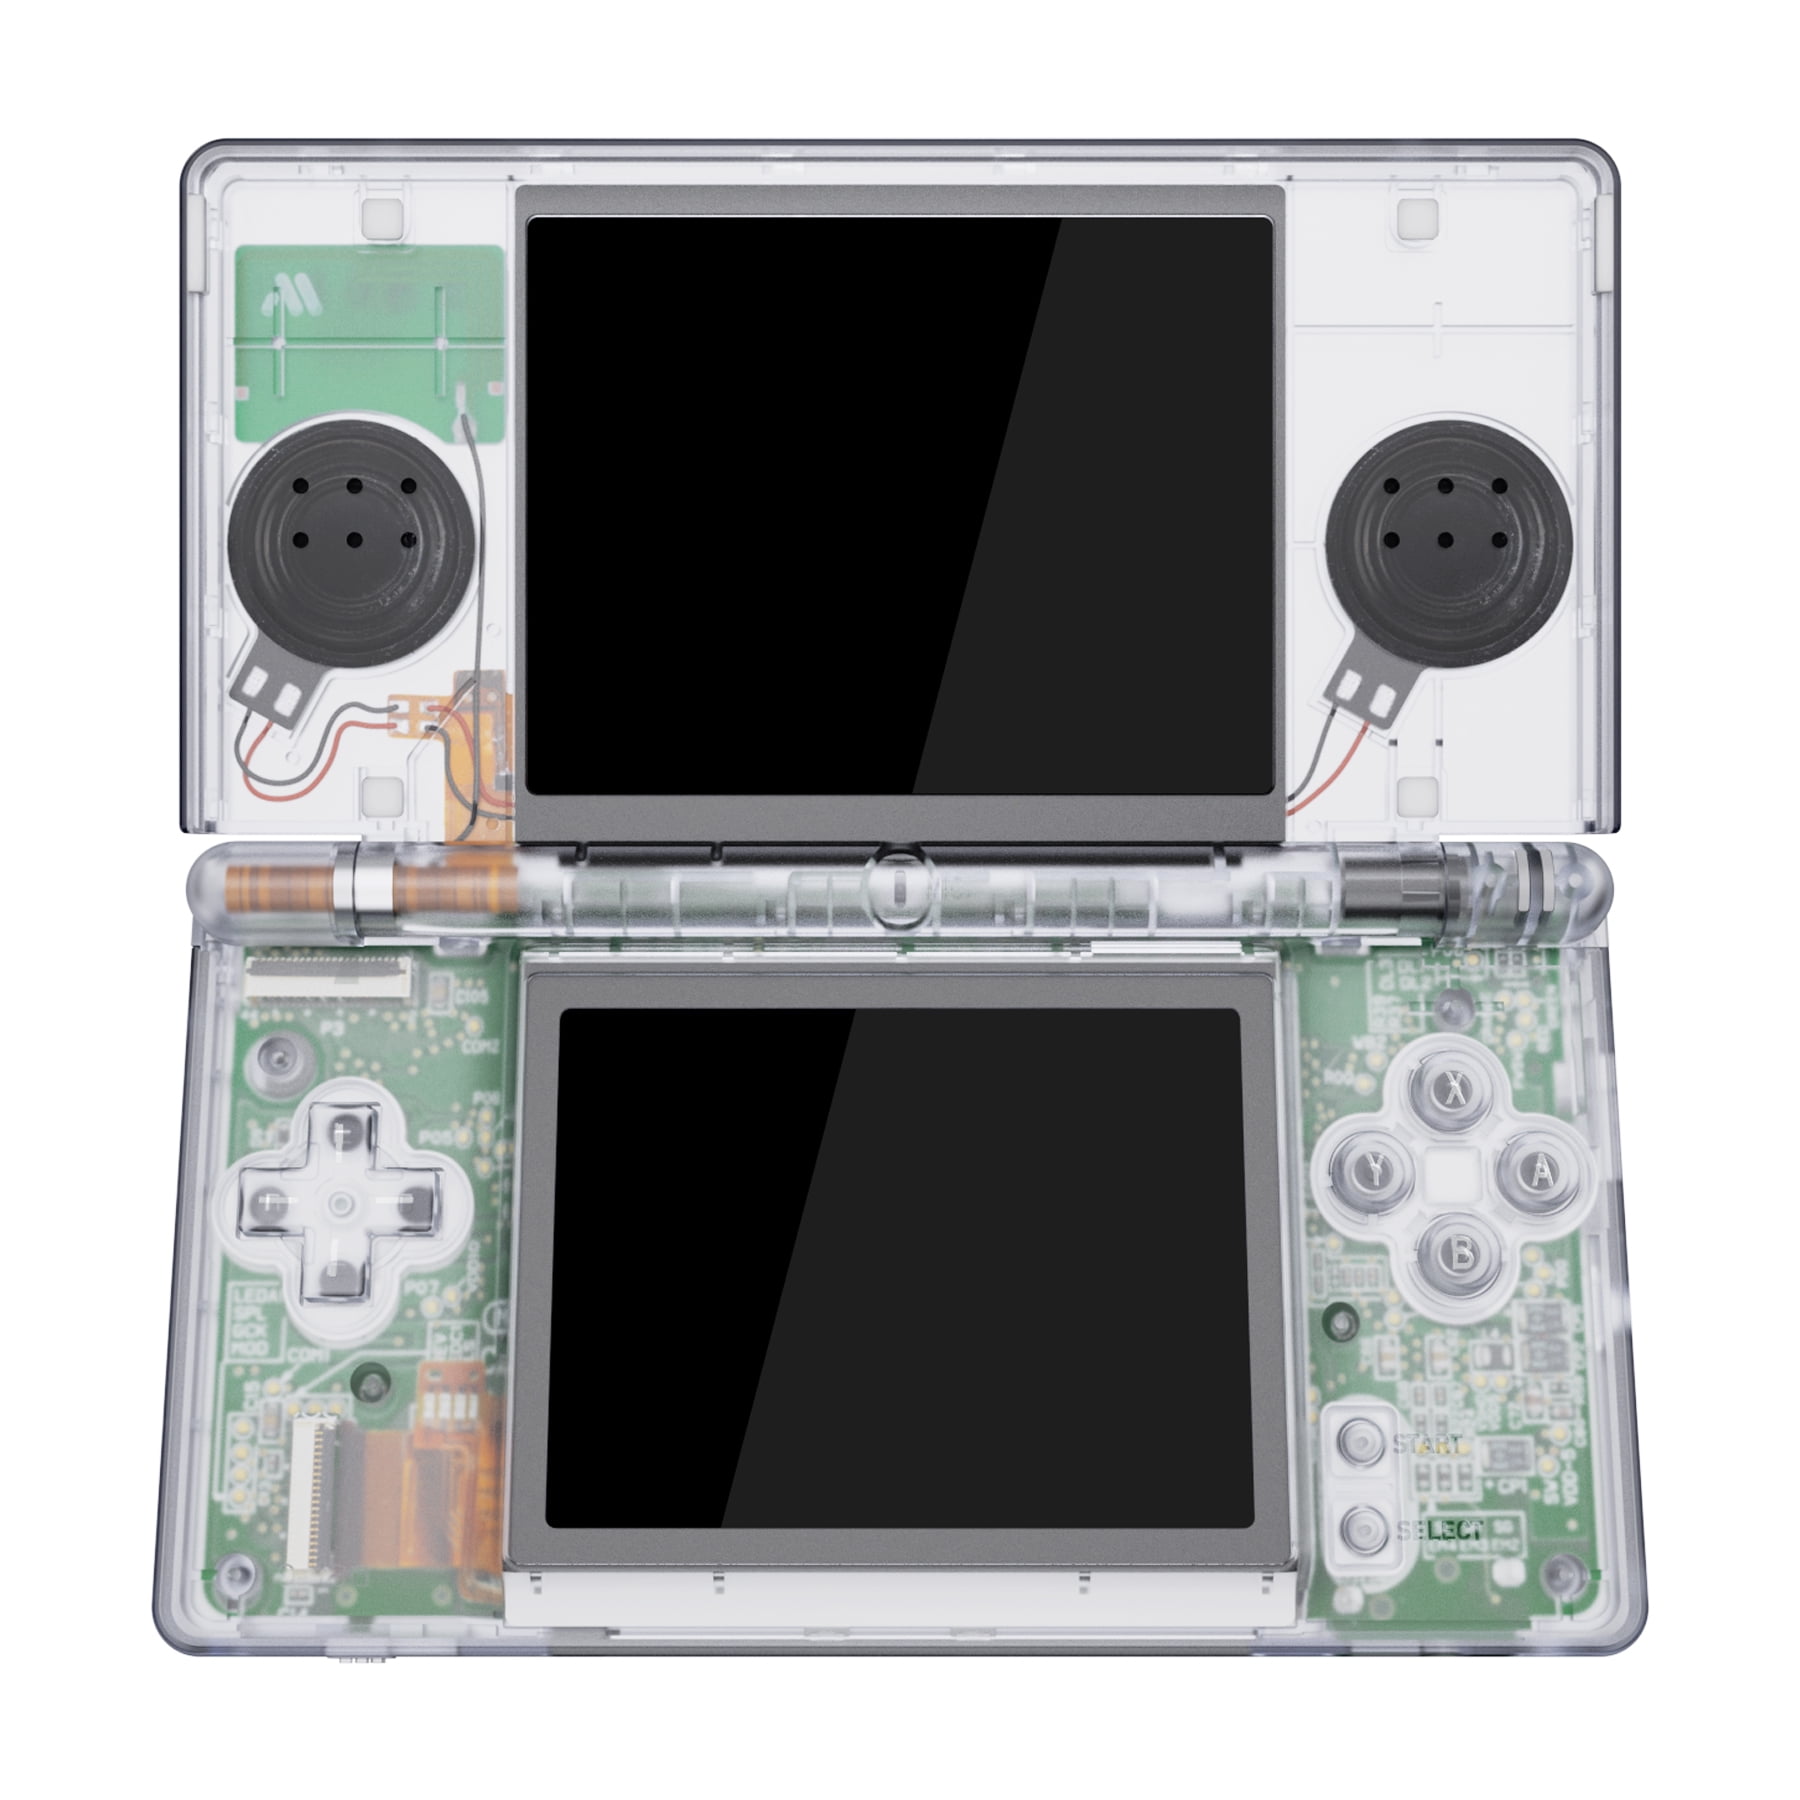 TekCase for DS Lite, DSi adds protection and extra battery life